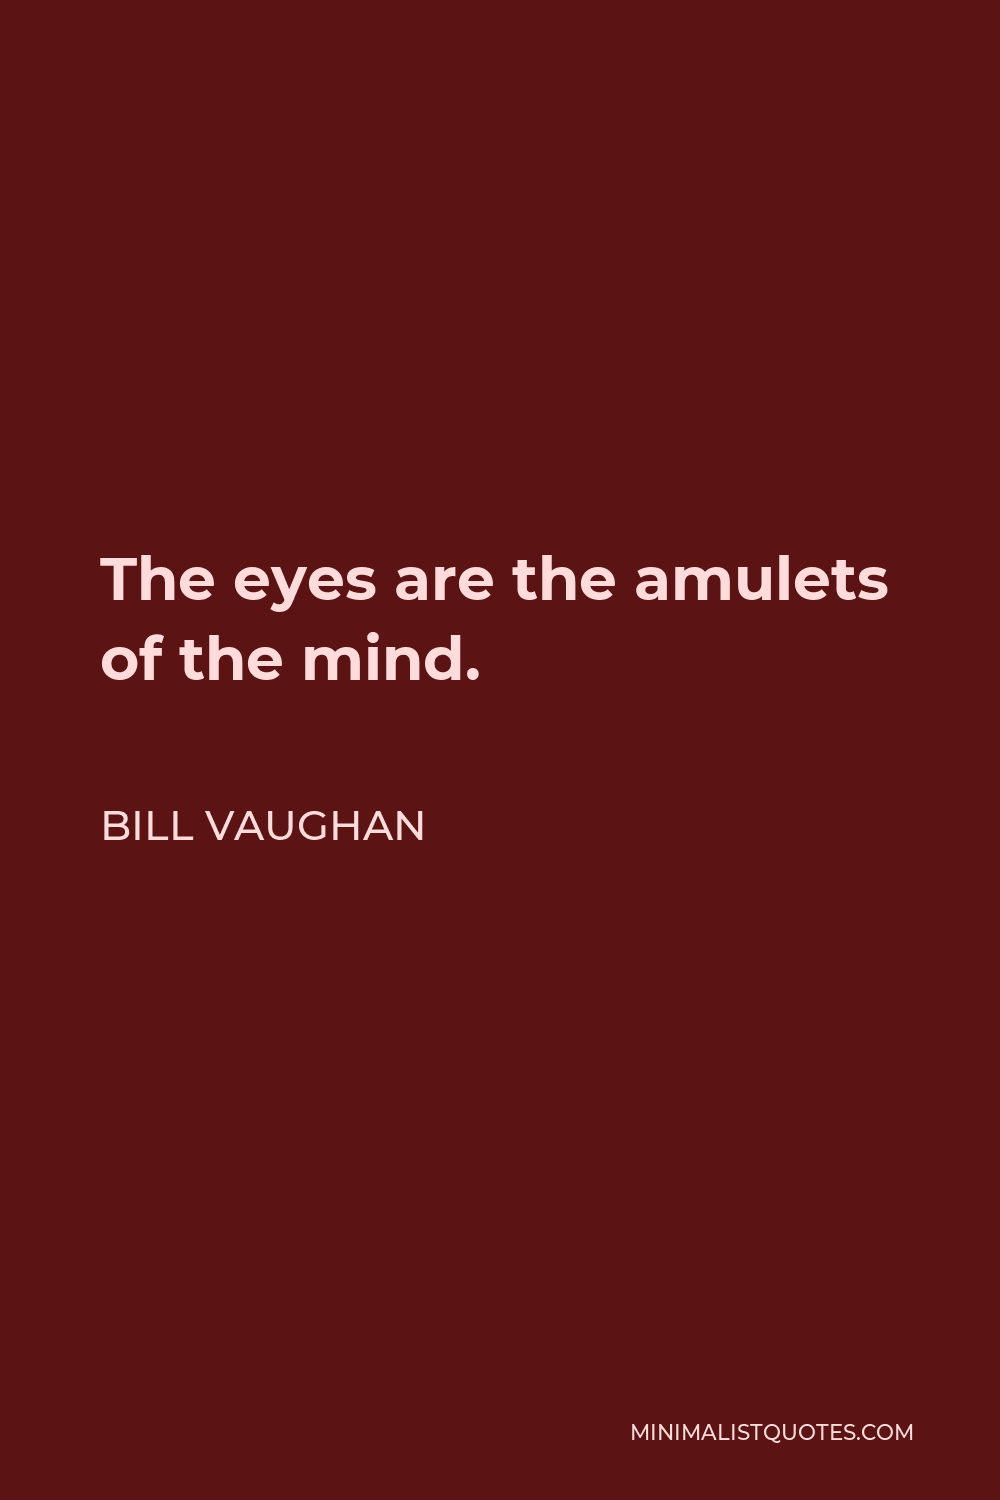 Bill Vaughan Quote - The eyes are the amulets of the mind.